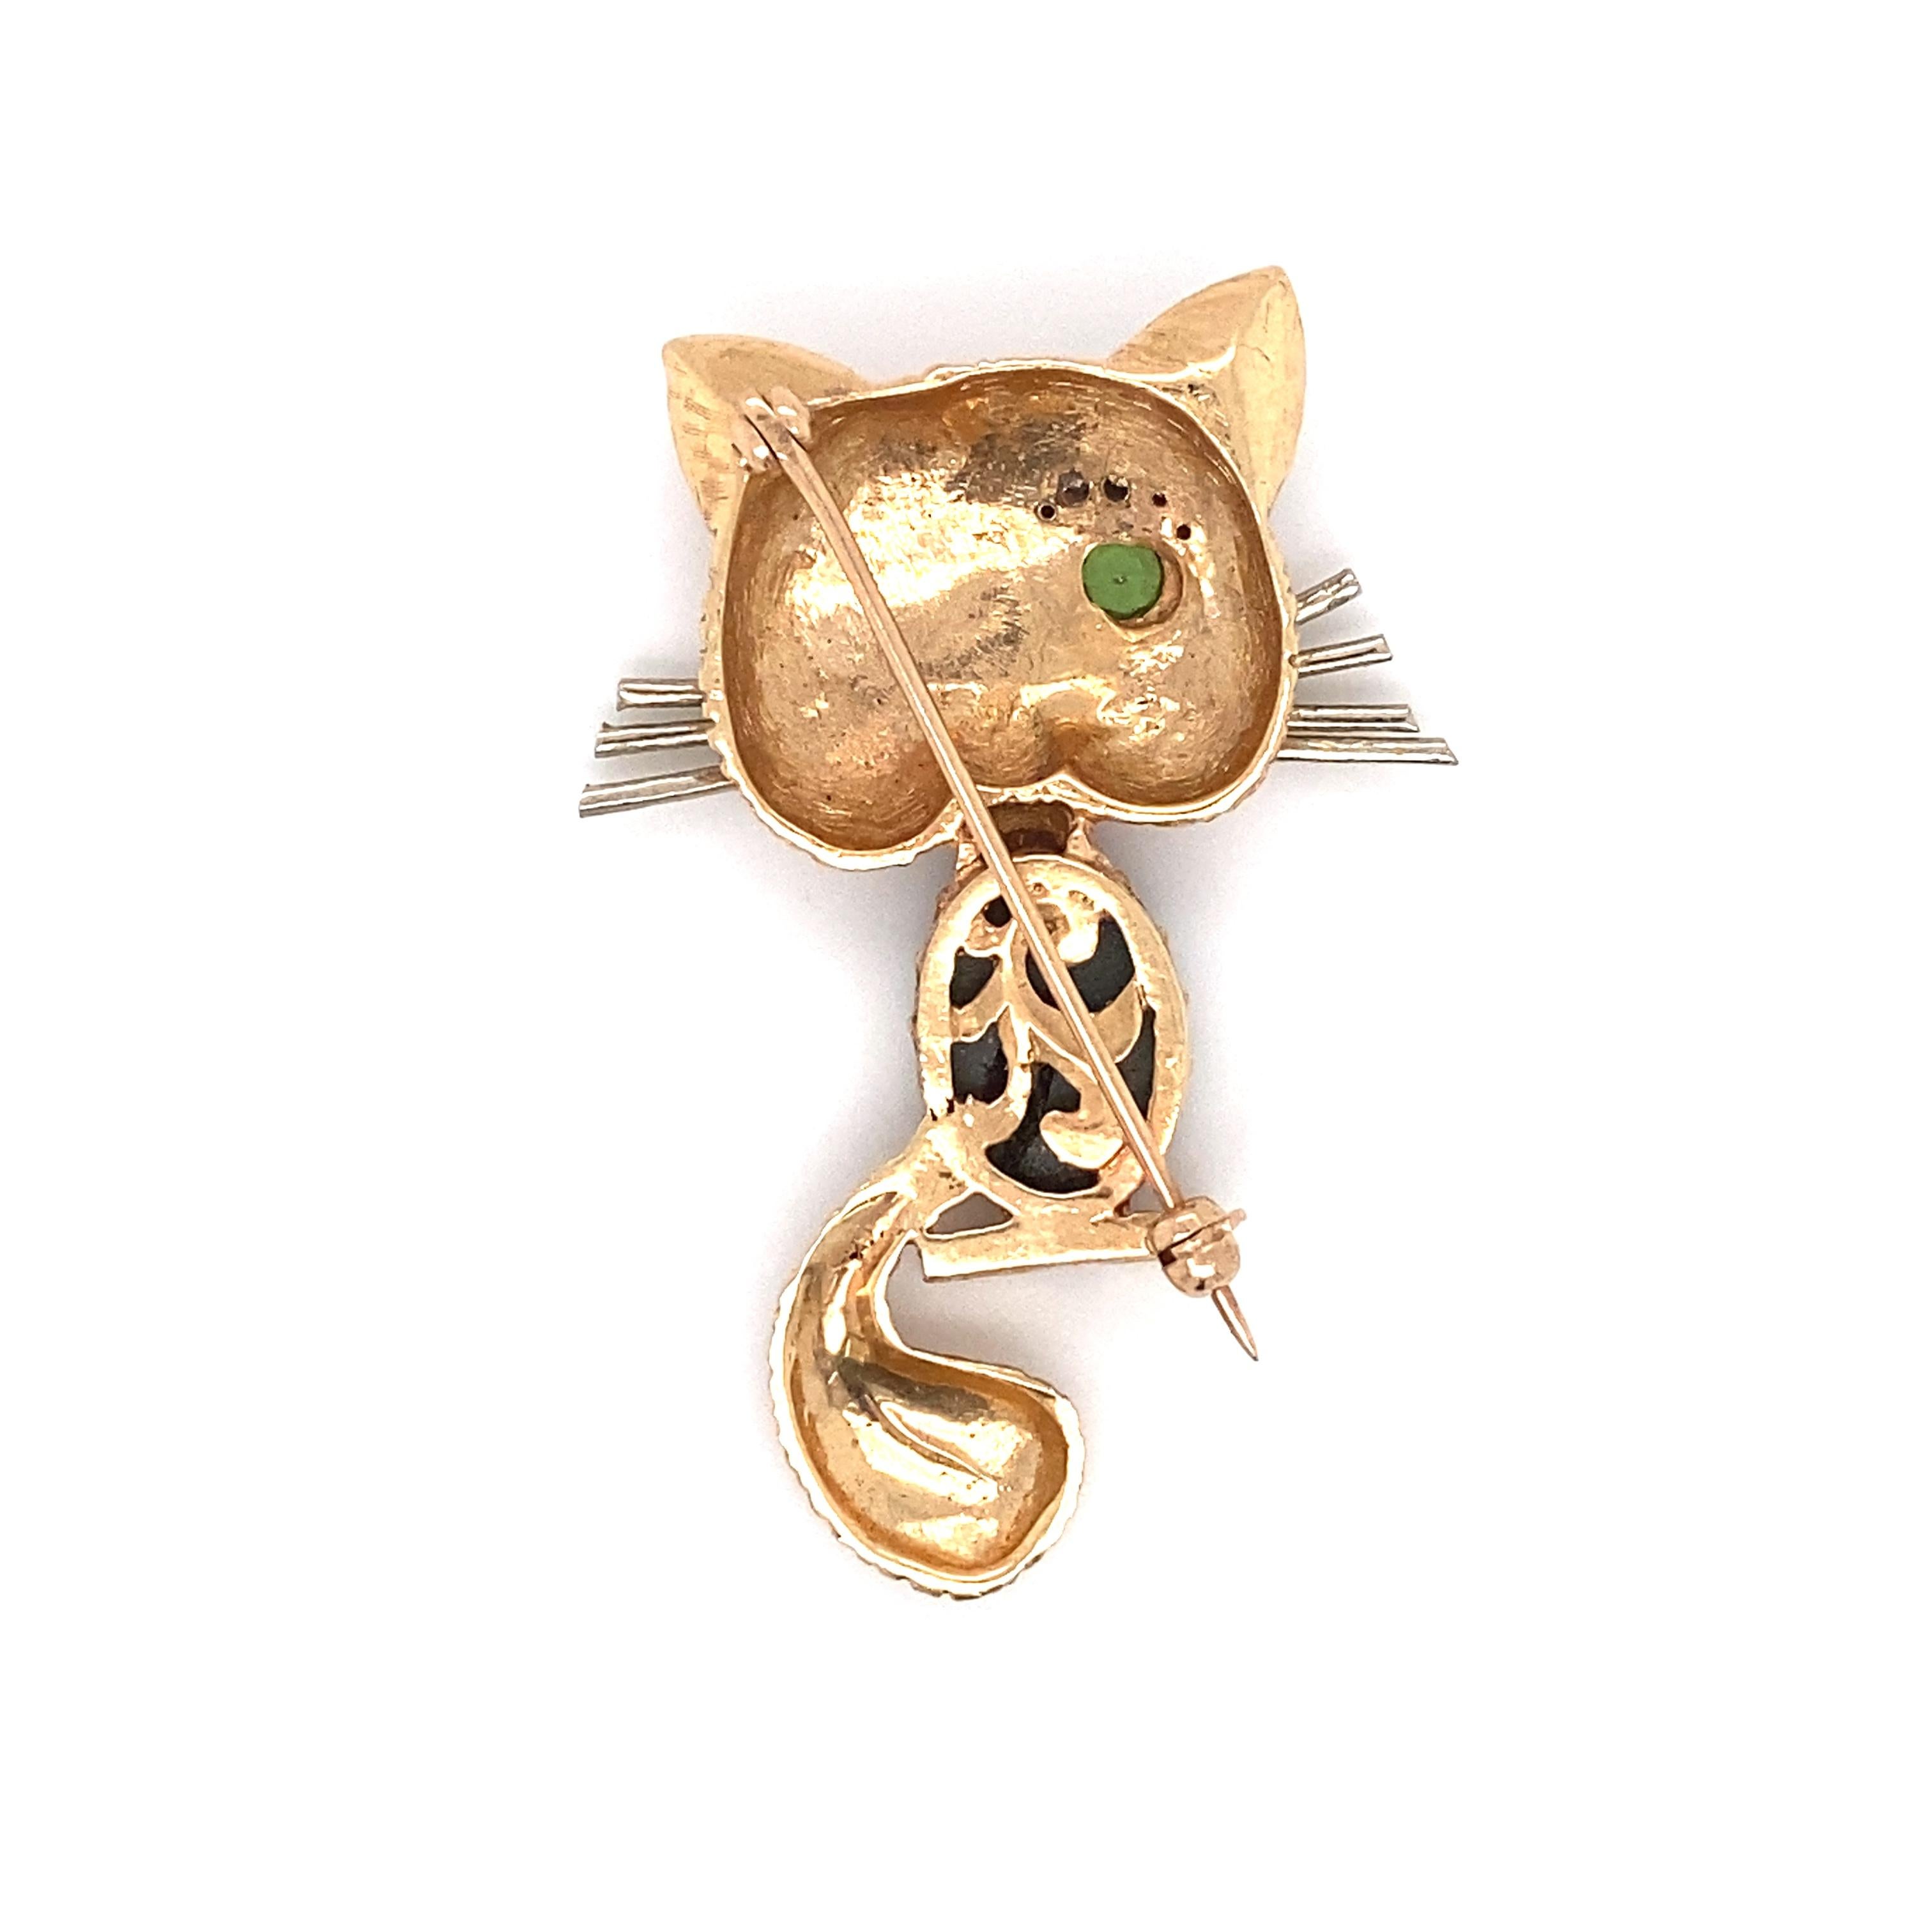 Circa: 1960s
Metal Type: 14 Karat Gold
Weight: 10.8 grams
Dimensions: 1.75 inch Height x 1 inch Width 

Whimsical Cat Brooch featuring a combination of sapphire, peridot and diamonds. Crafted in 14 Karat Gold, it is a stunning jewel from the 1960s! 